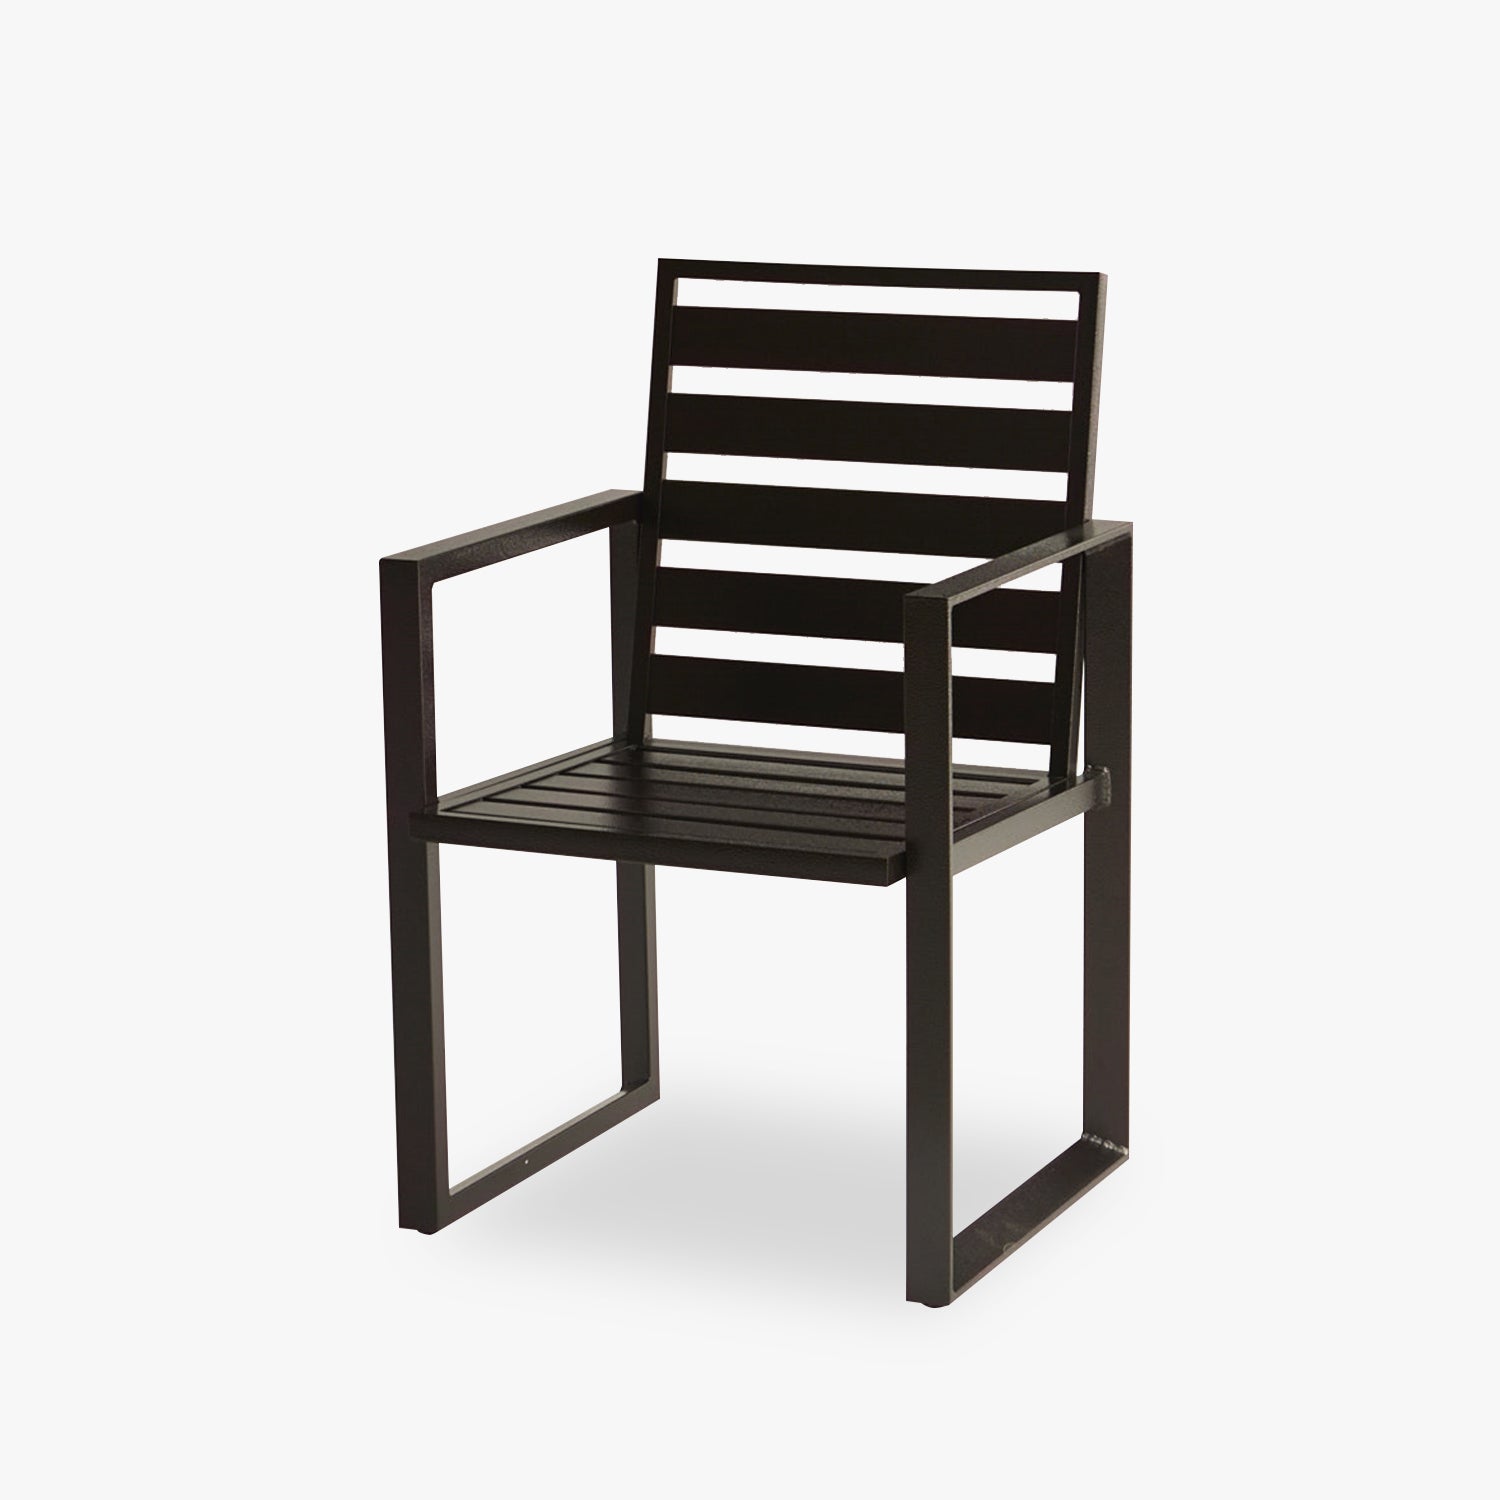 outdoor dining chair, patio metal chairs. outdoor dining outdoor dinner cushion